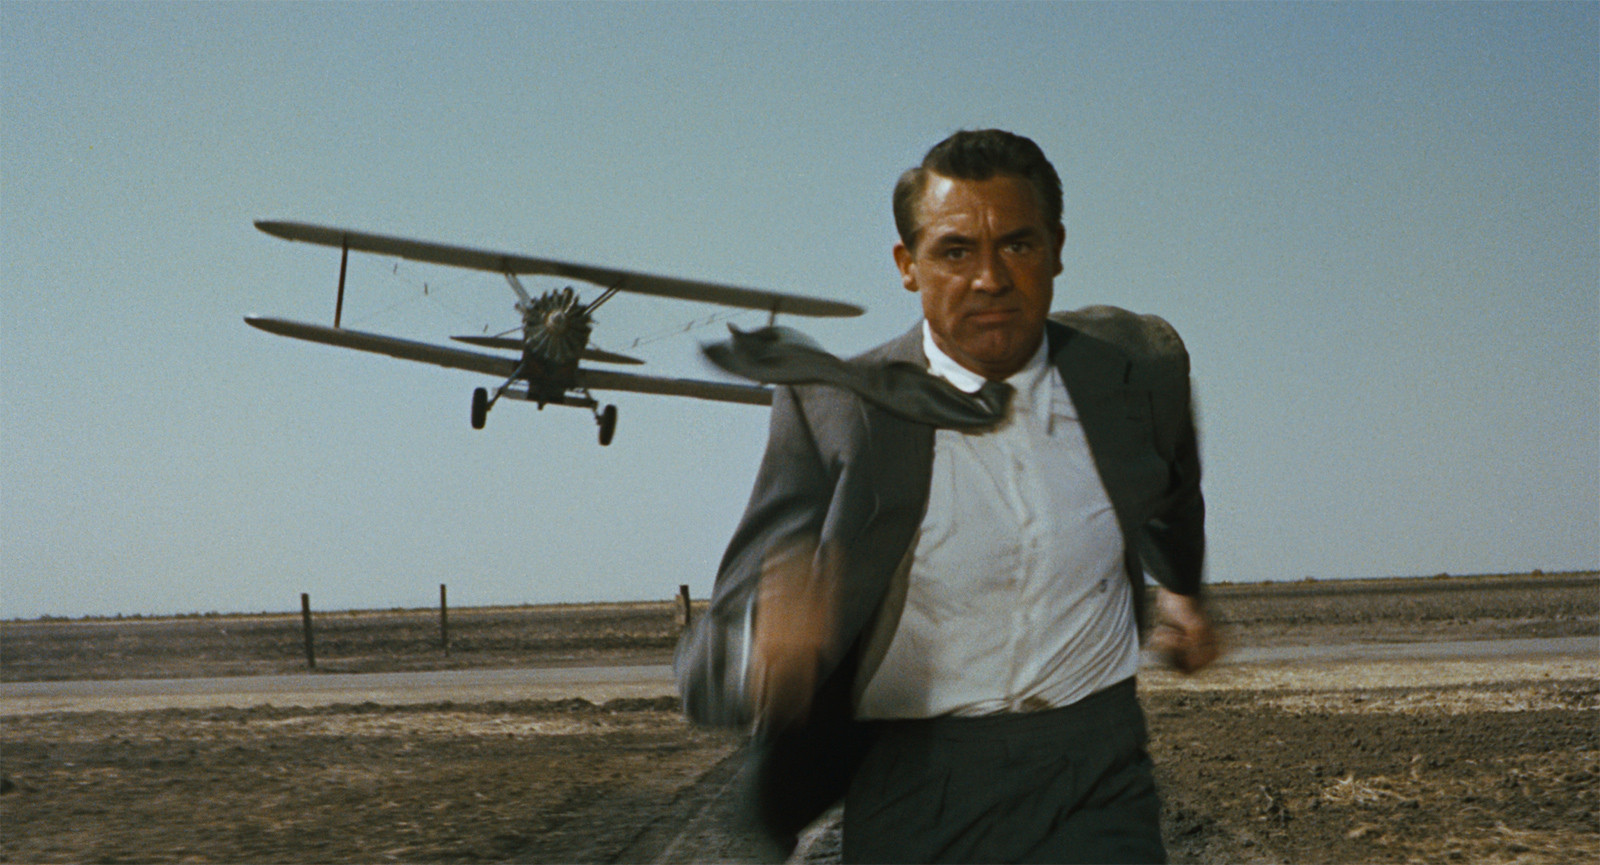 Cary Grant in North by Northwest(Hitchcock 1959)